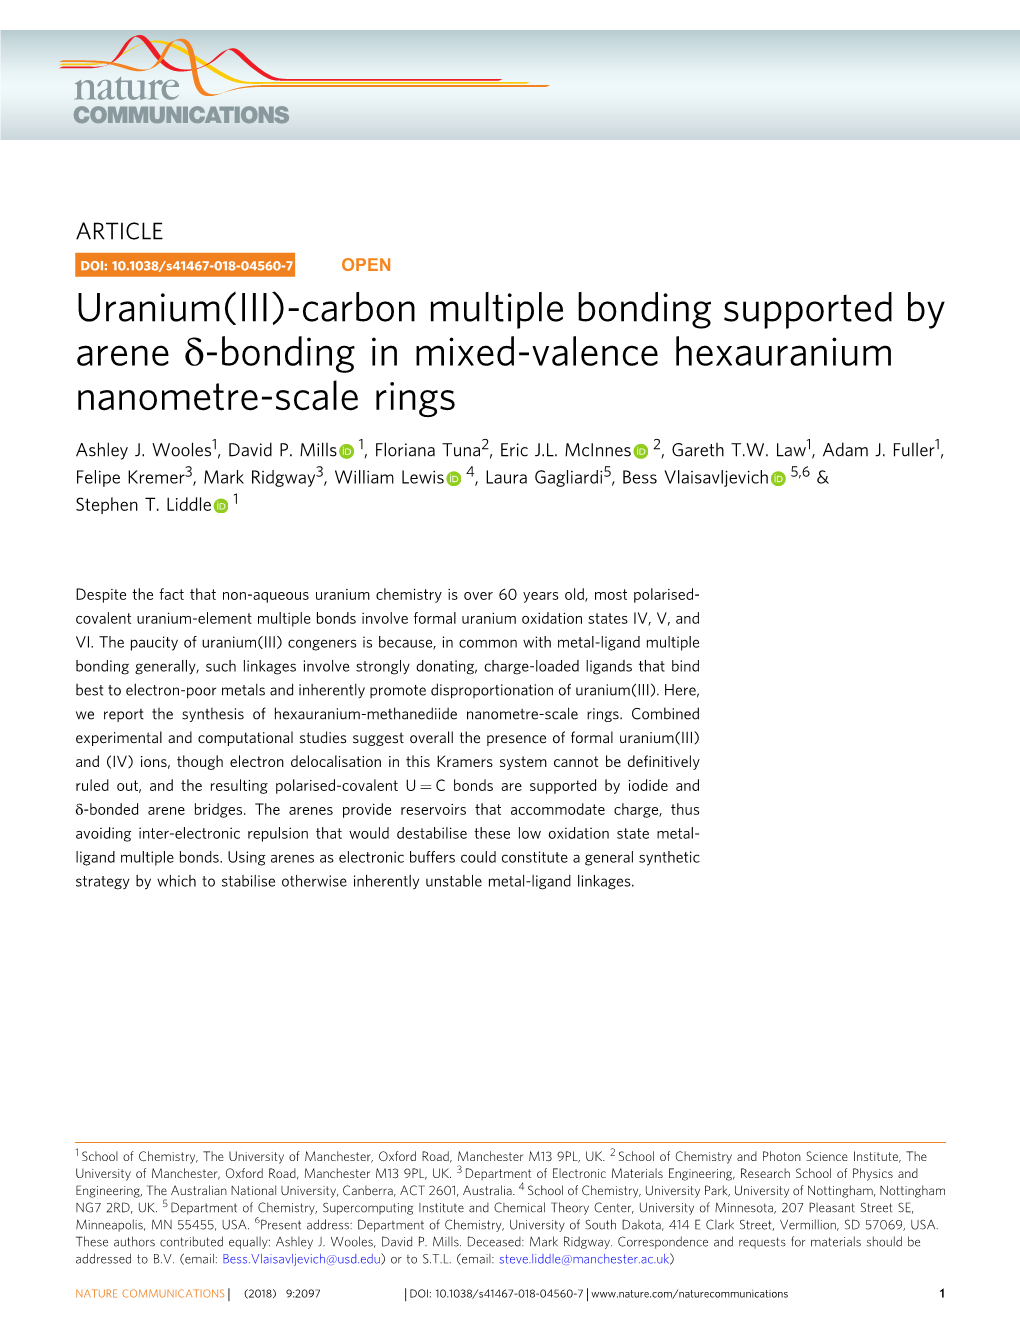 Uranium(III)-Carbon Multiple Bonding Supported by Arene Δ-Bonding in Mixed-Valence Hexauranium Nanometre-Scale Rings